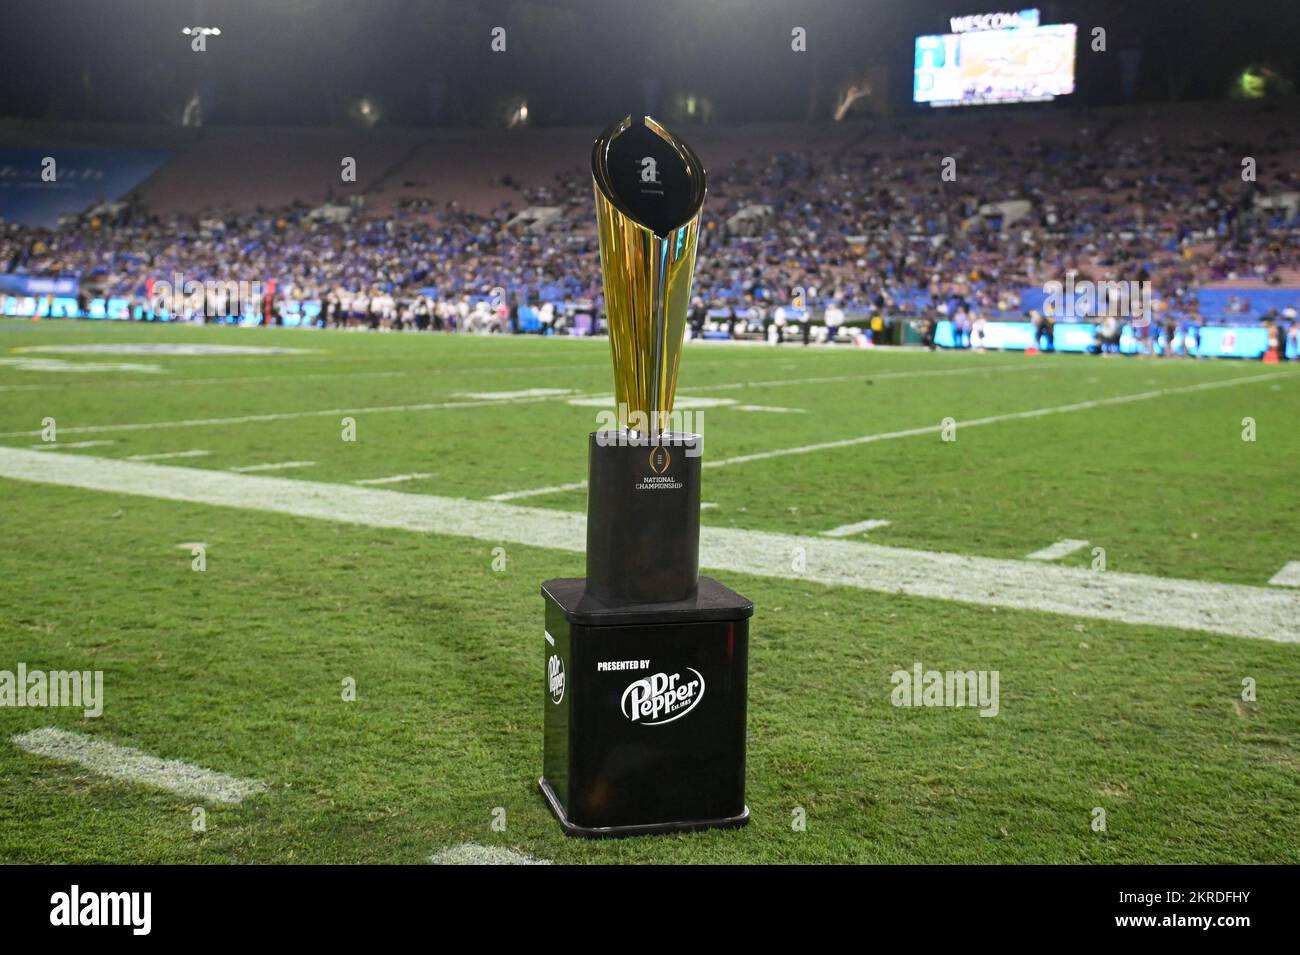 The College Football Playoff National Championship trophy sits on the sideline during an NCAA football game between the UCLA Bruins and the Washington Stock Photo